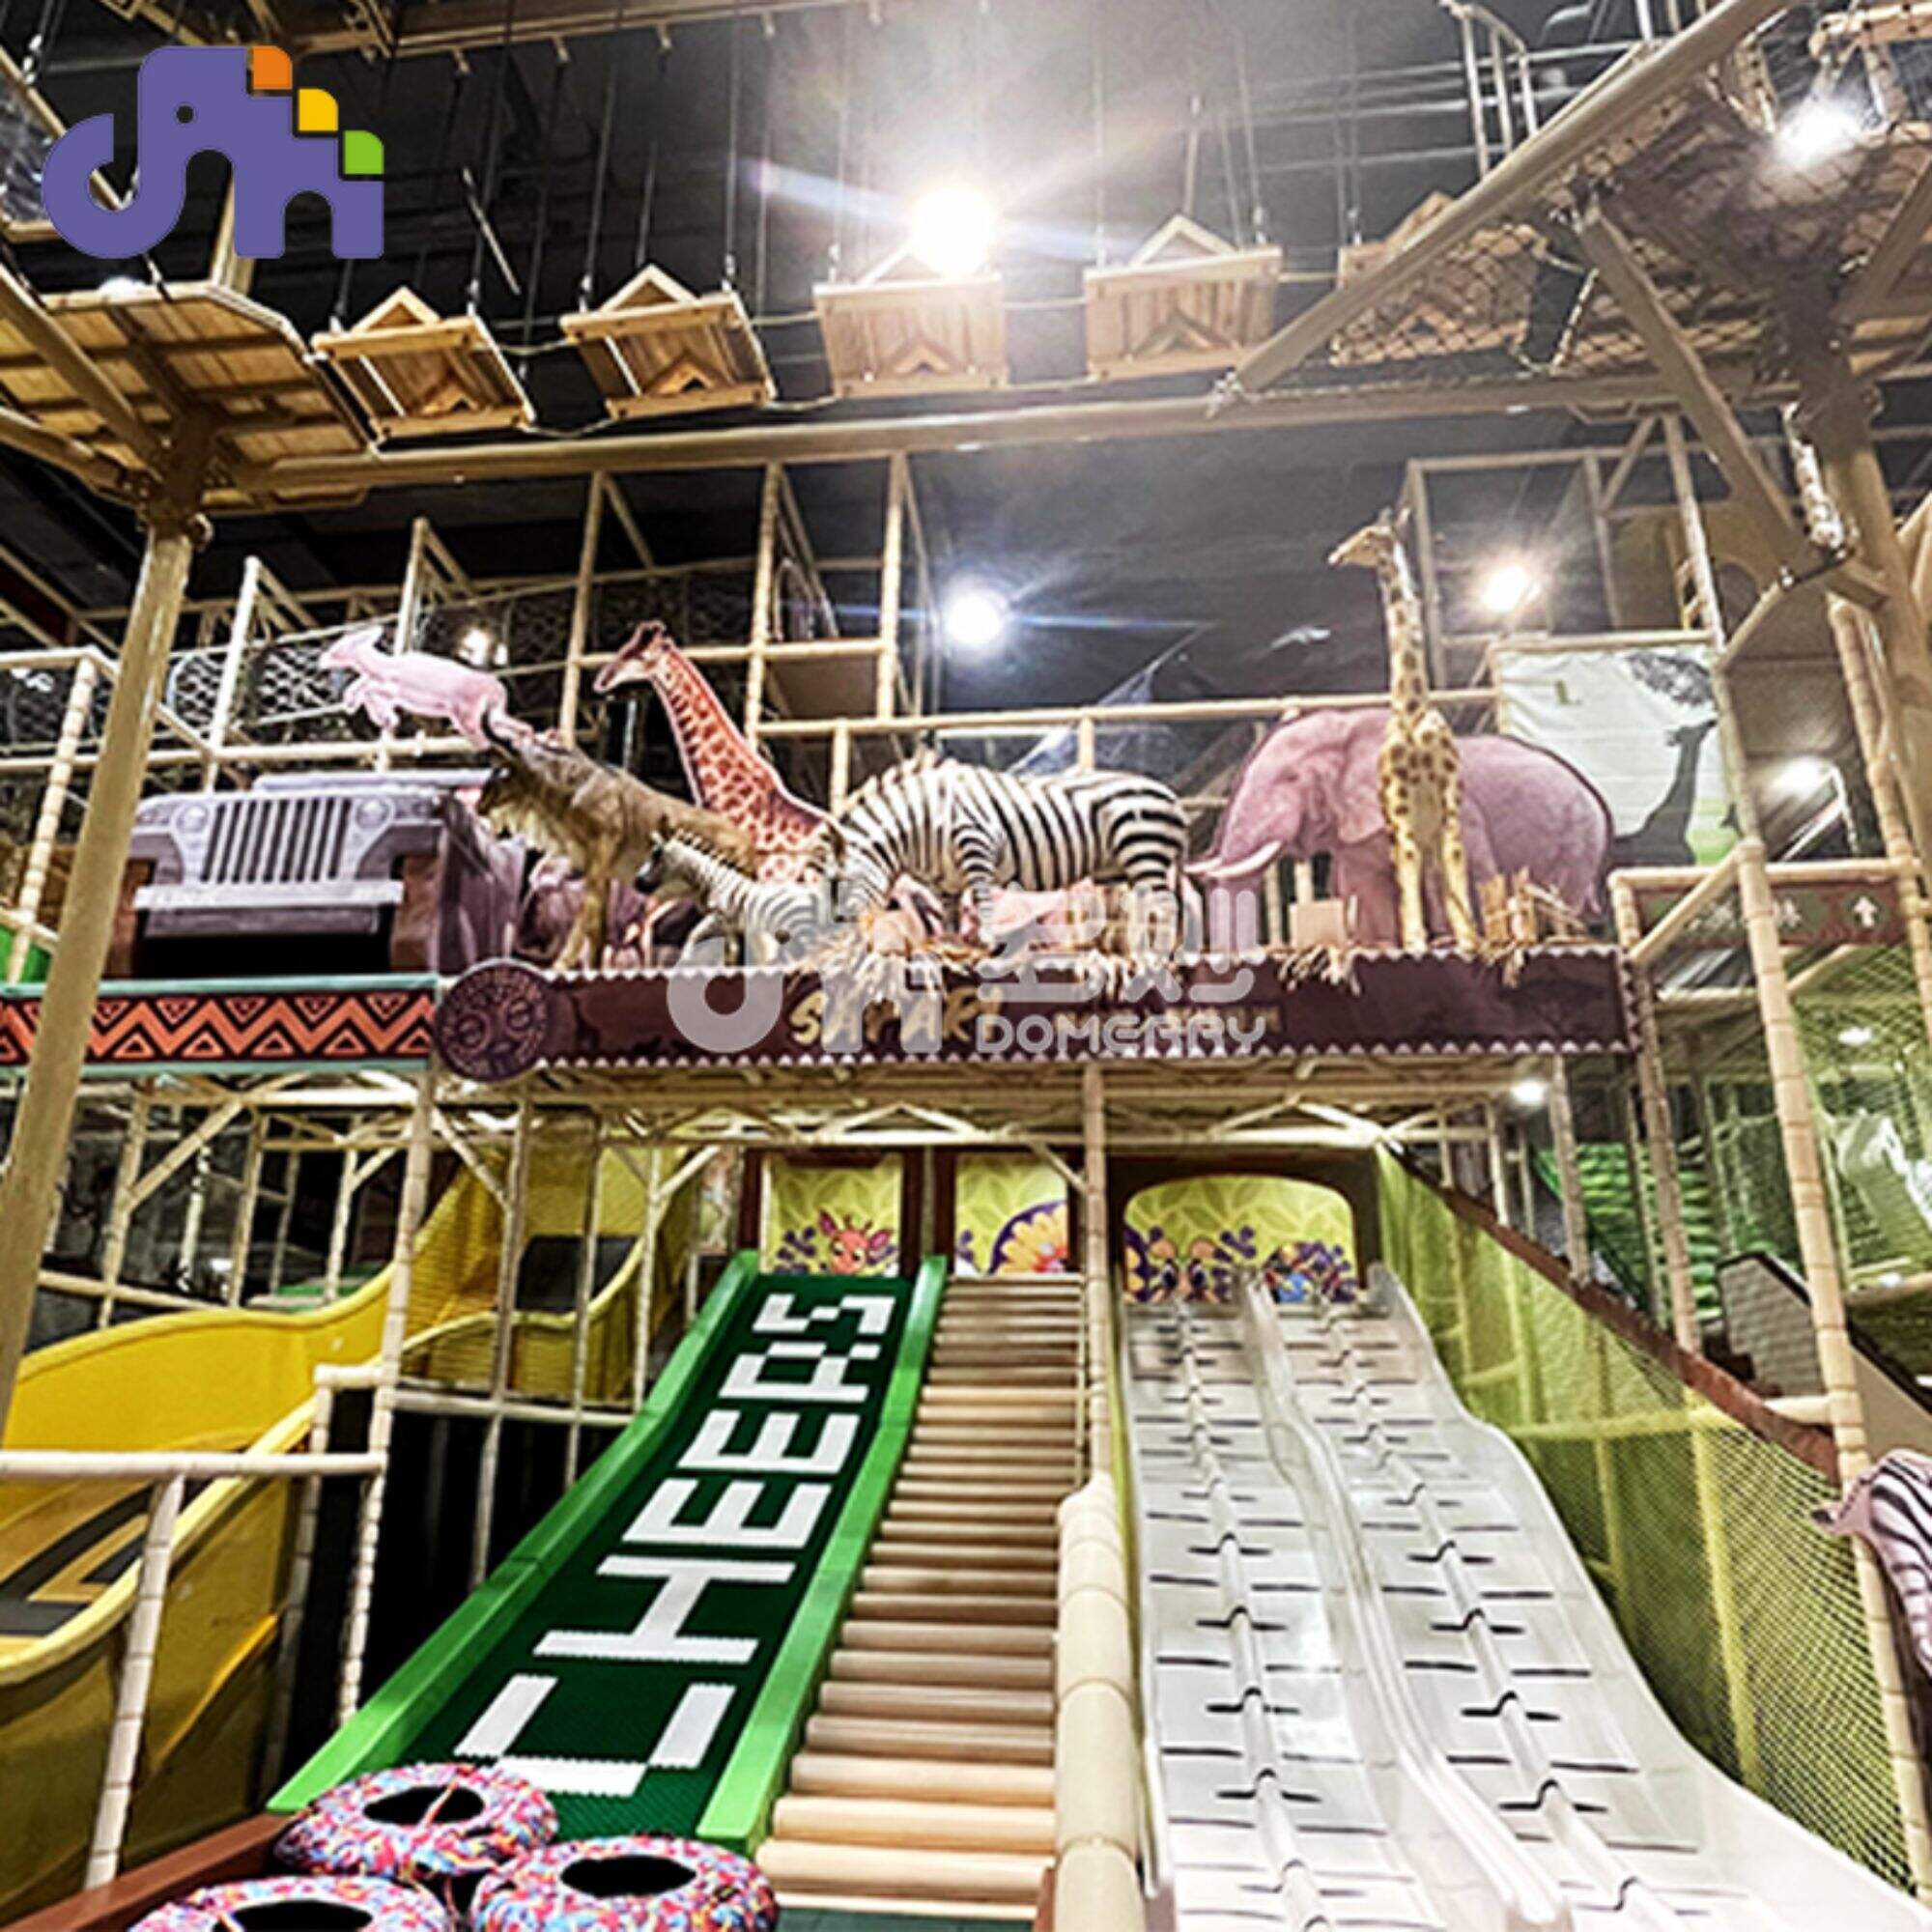 Domerry Safari Jungle Theme Indoor Playground Equipment Educational Zone with Slides for Children